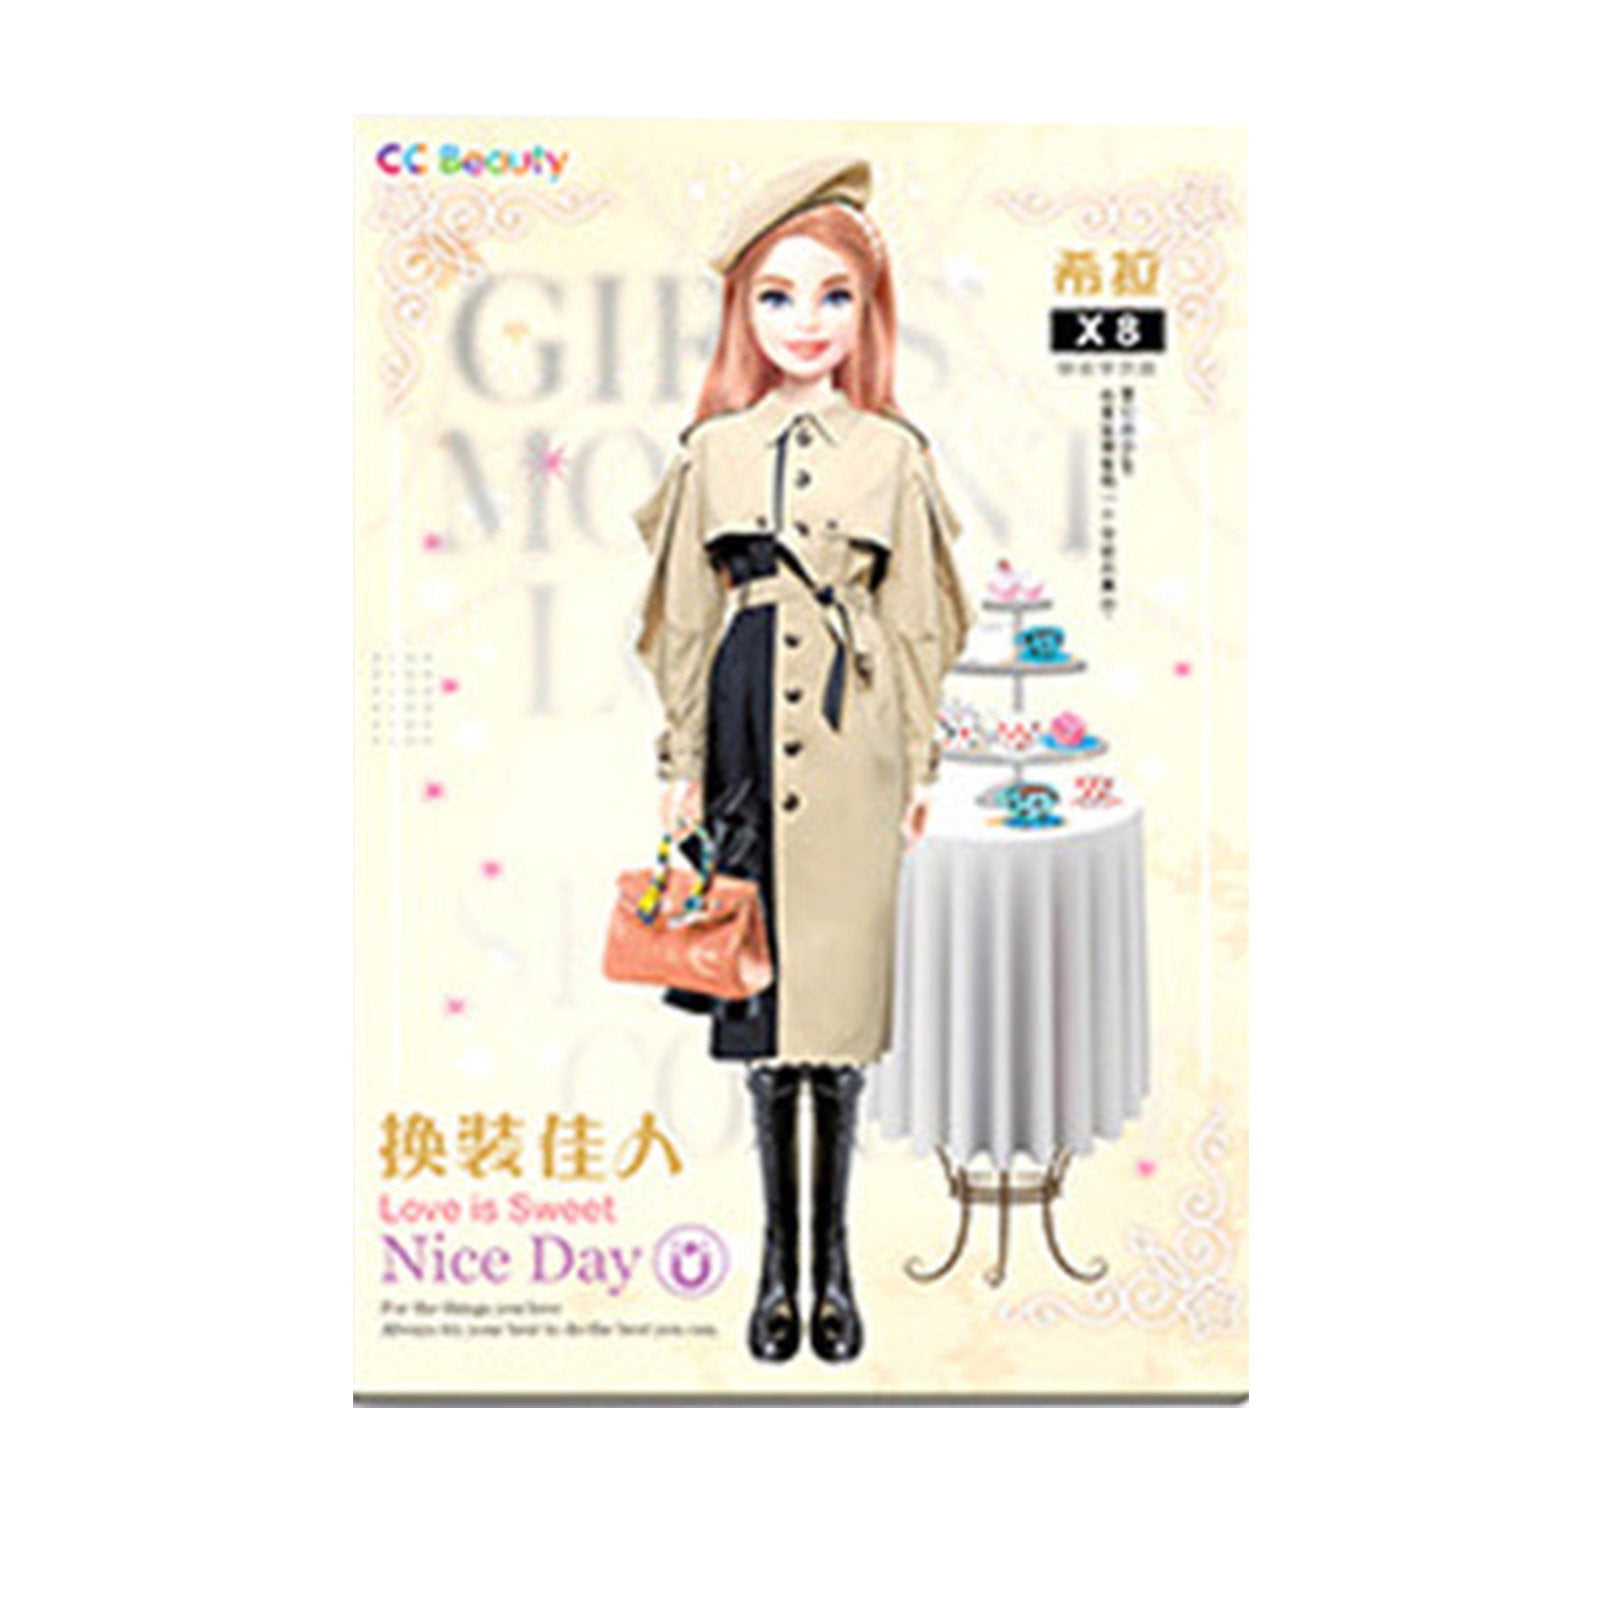 Ma-gnet Princess Dress-up Doll Clothes Toys Kids Ma-gnetic Baby Dress Up  Paper Doll Μagnet Dresssing Games, Pretend Play Travel Playset Toy Dolls  For Girls 